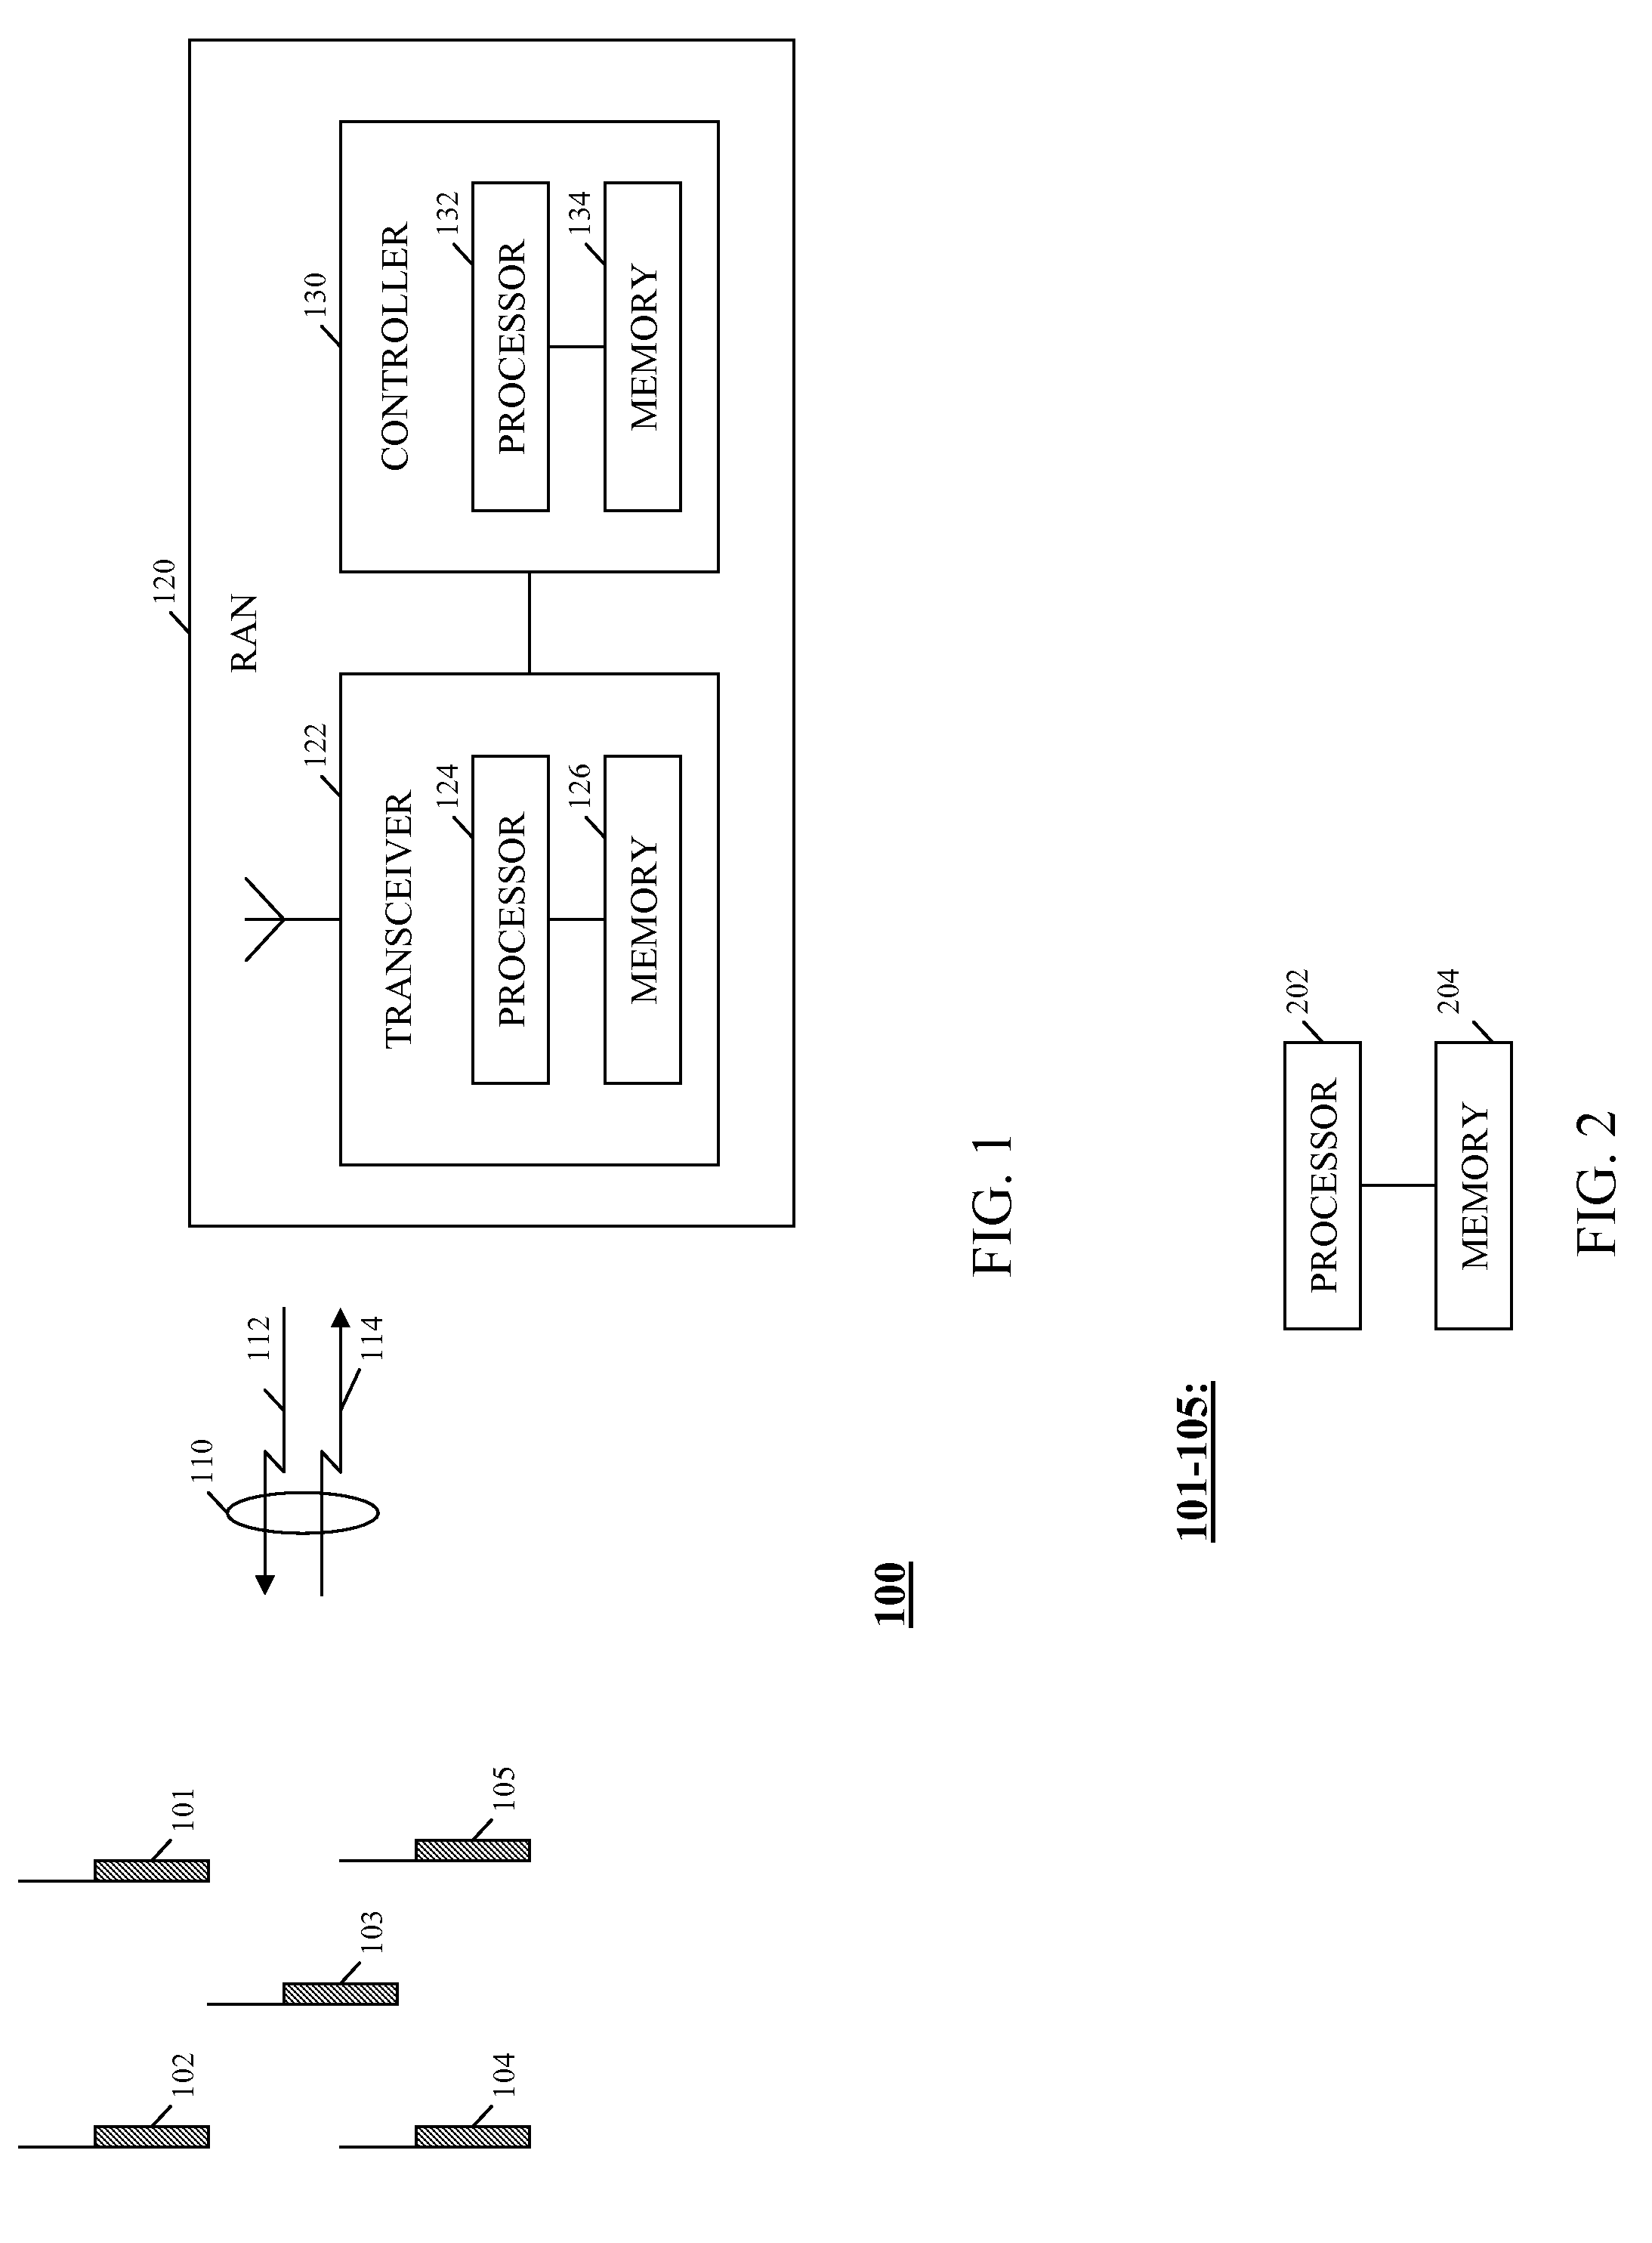 Method and apparatus for downlink resource allocation in an orthogonal frequency division multiplexing communication system